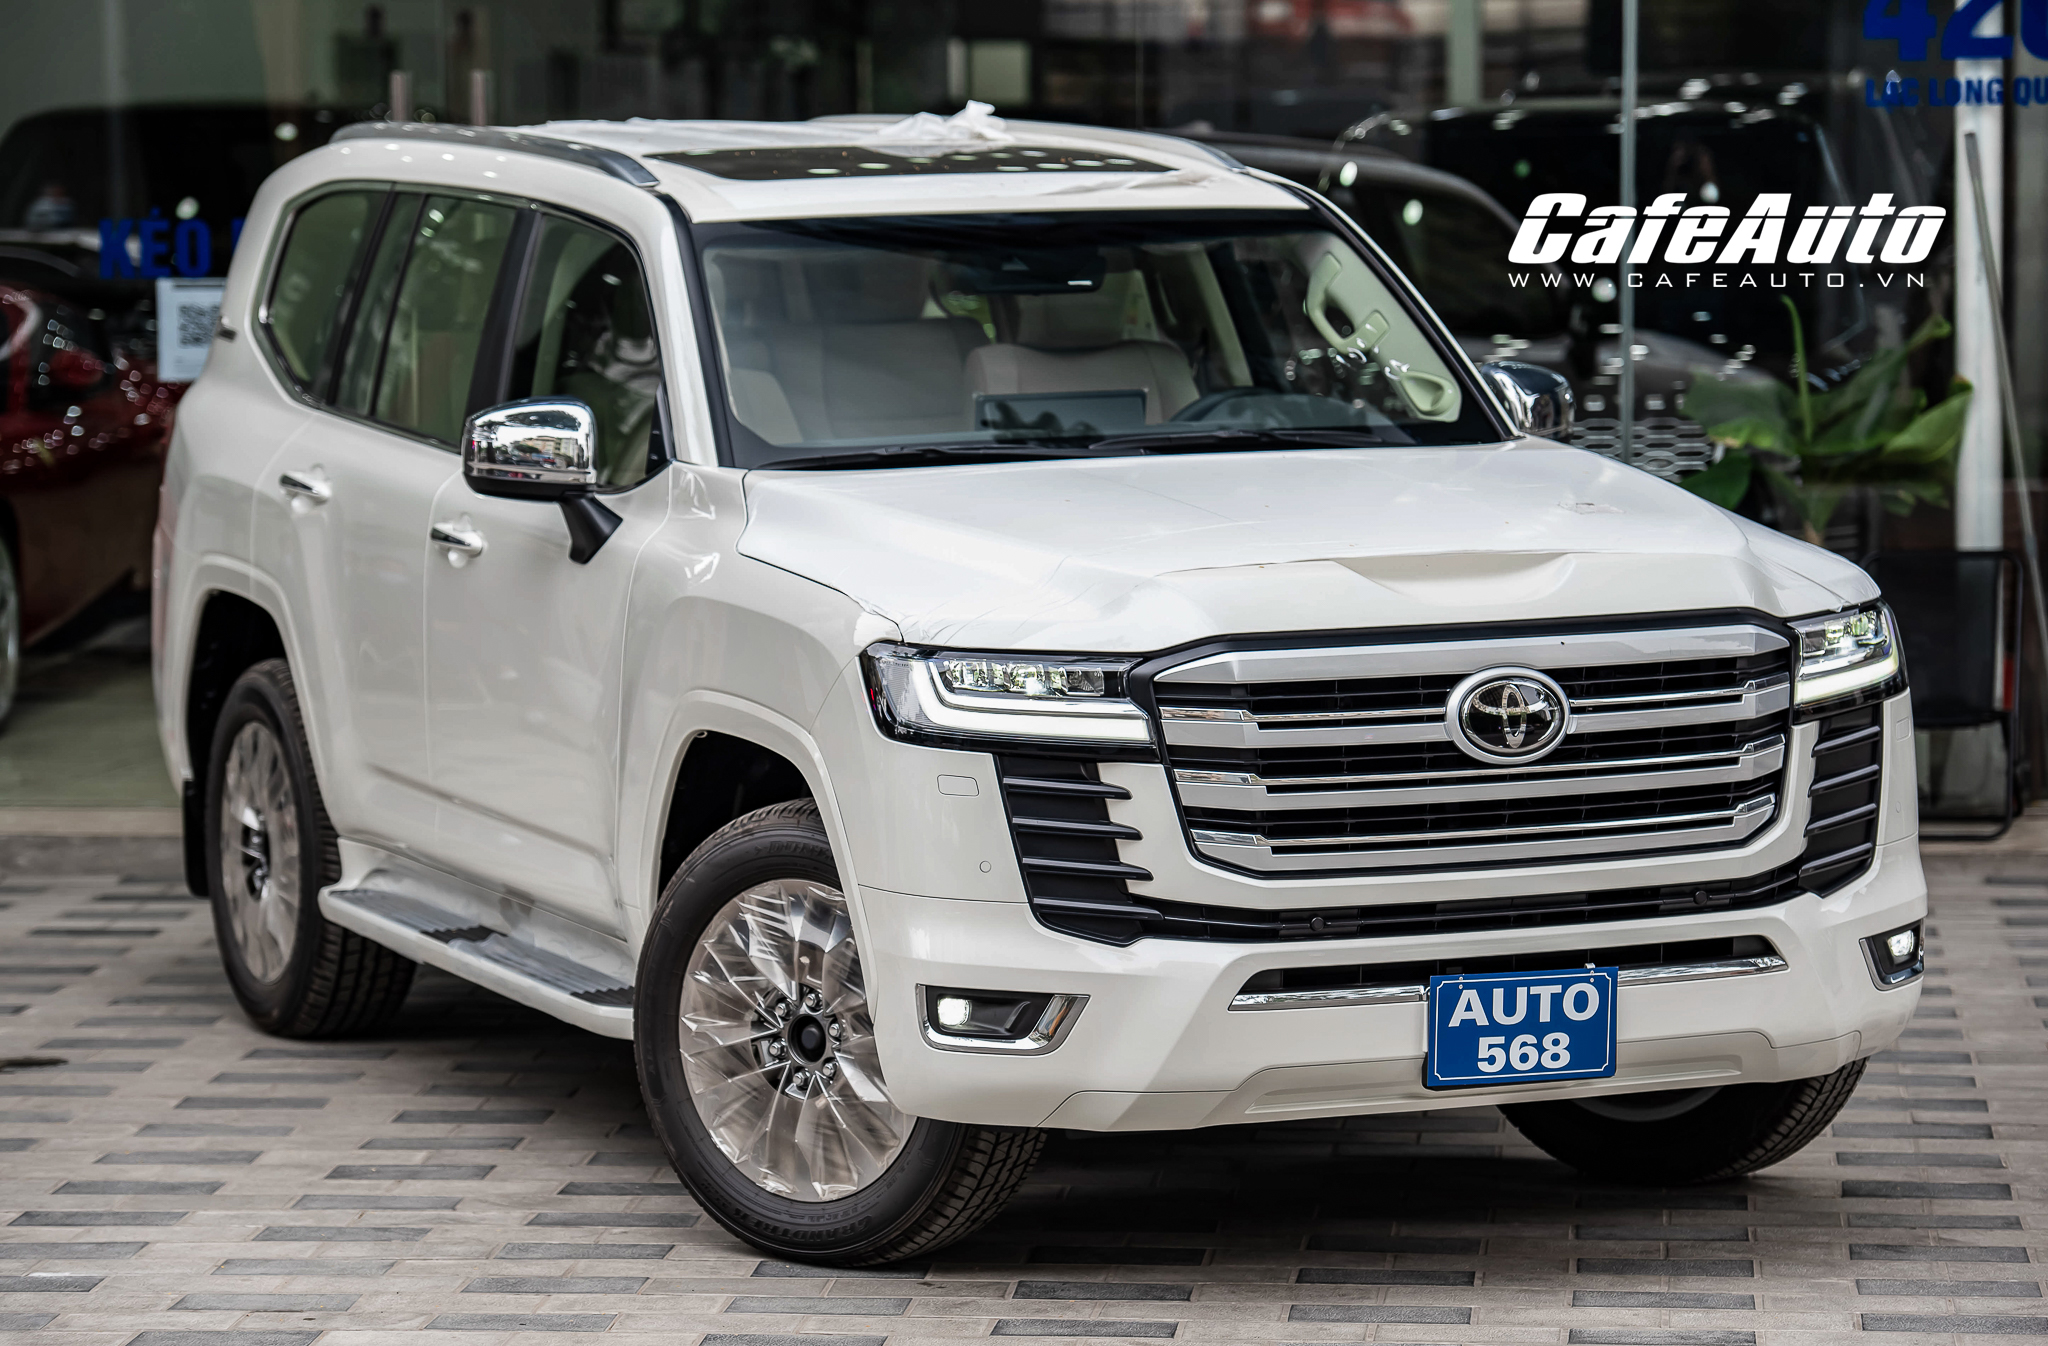 toyota-land-cruiser-2022-do-trung-dong-cafeautovn-8